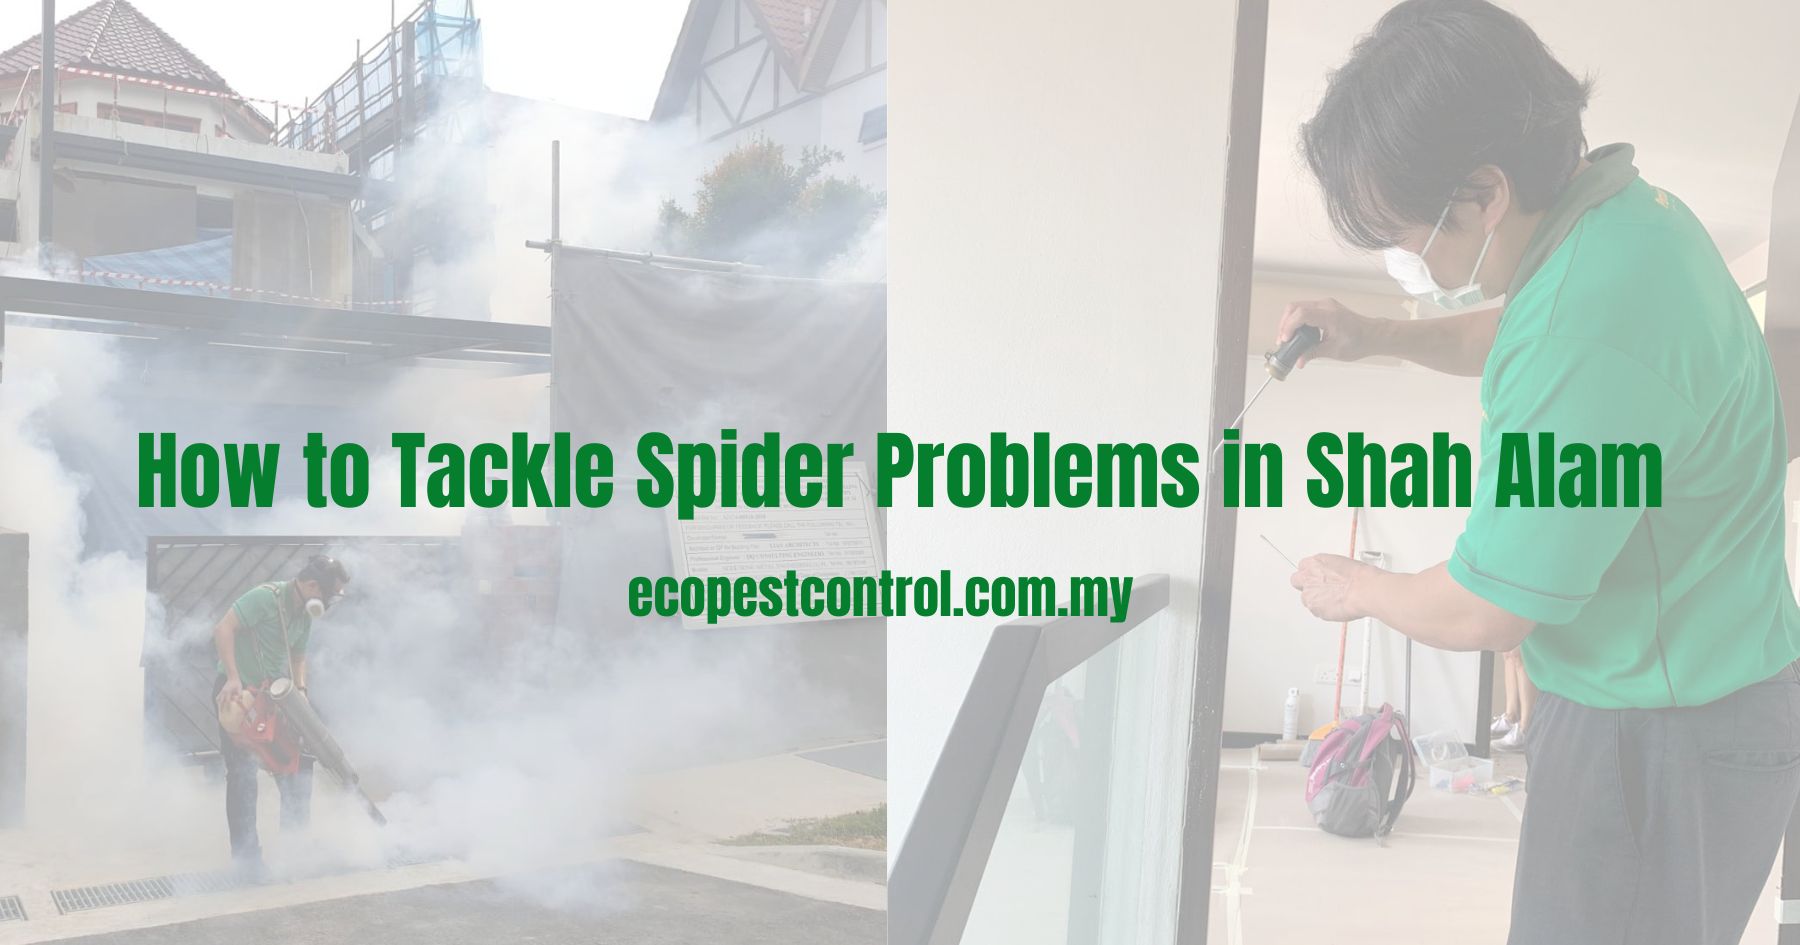 How to Tackle Spider Problems in Shah Alam